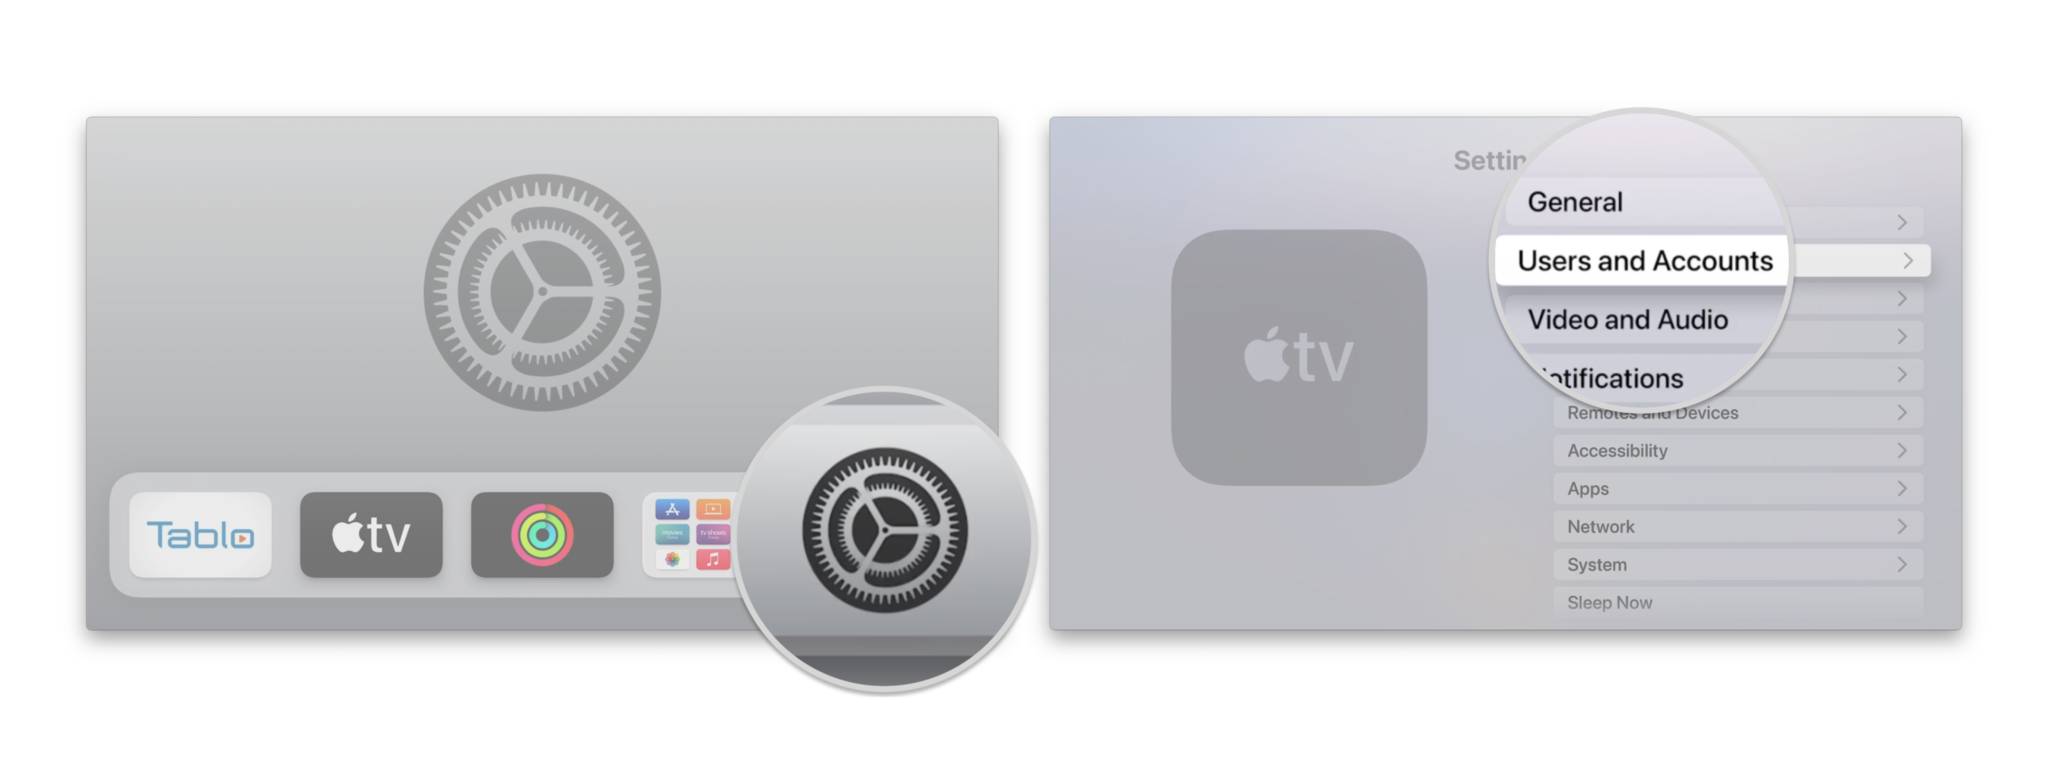 How to add a user on the Apple TV by showing steps: Launch Settings, Click Users and Accounts